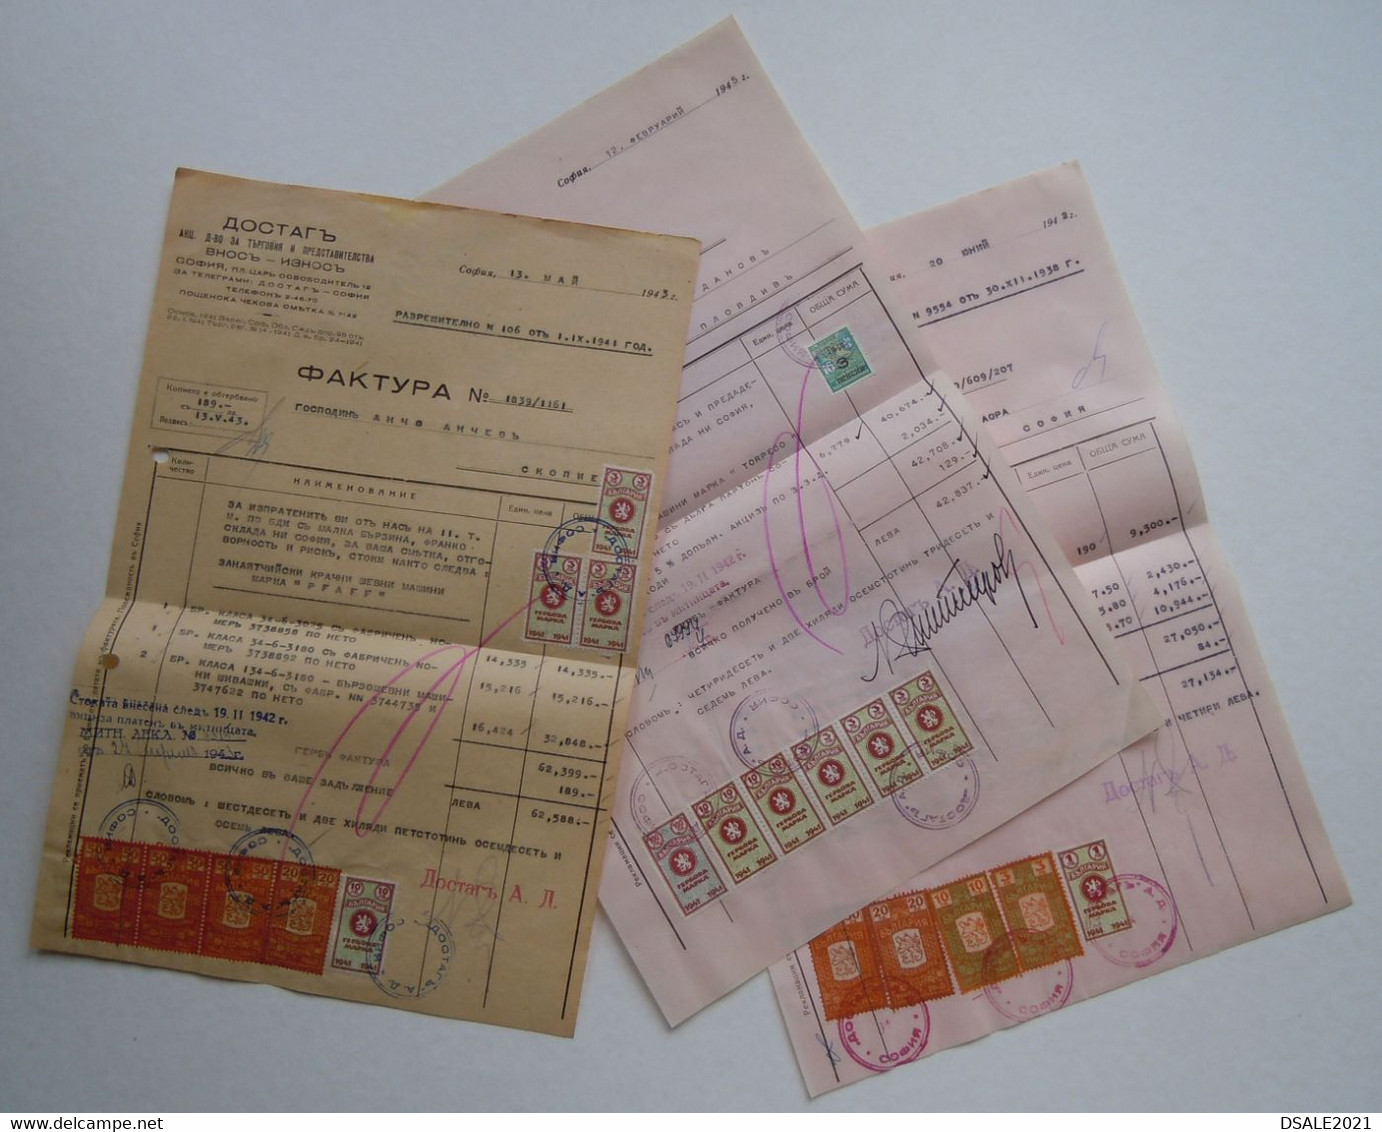 Bulgaria Lot Of 3 Document, Selection Ww2-1940s W/Various Color Fiscal Revenue Stamps, Timbres Fiscaux Bulgarie (38501) - Timbres De Service